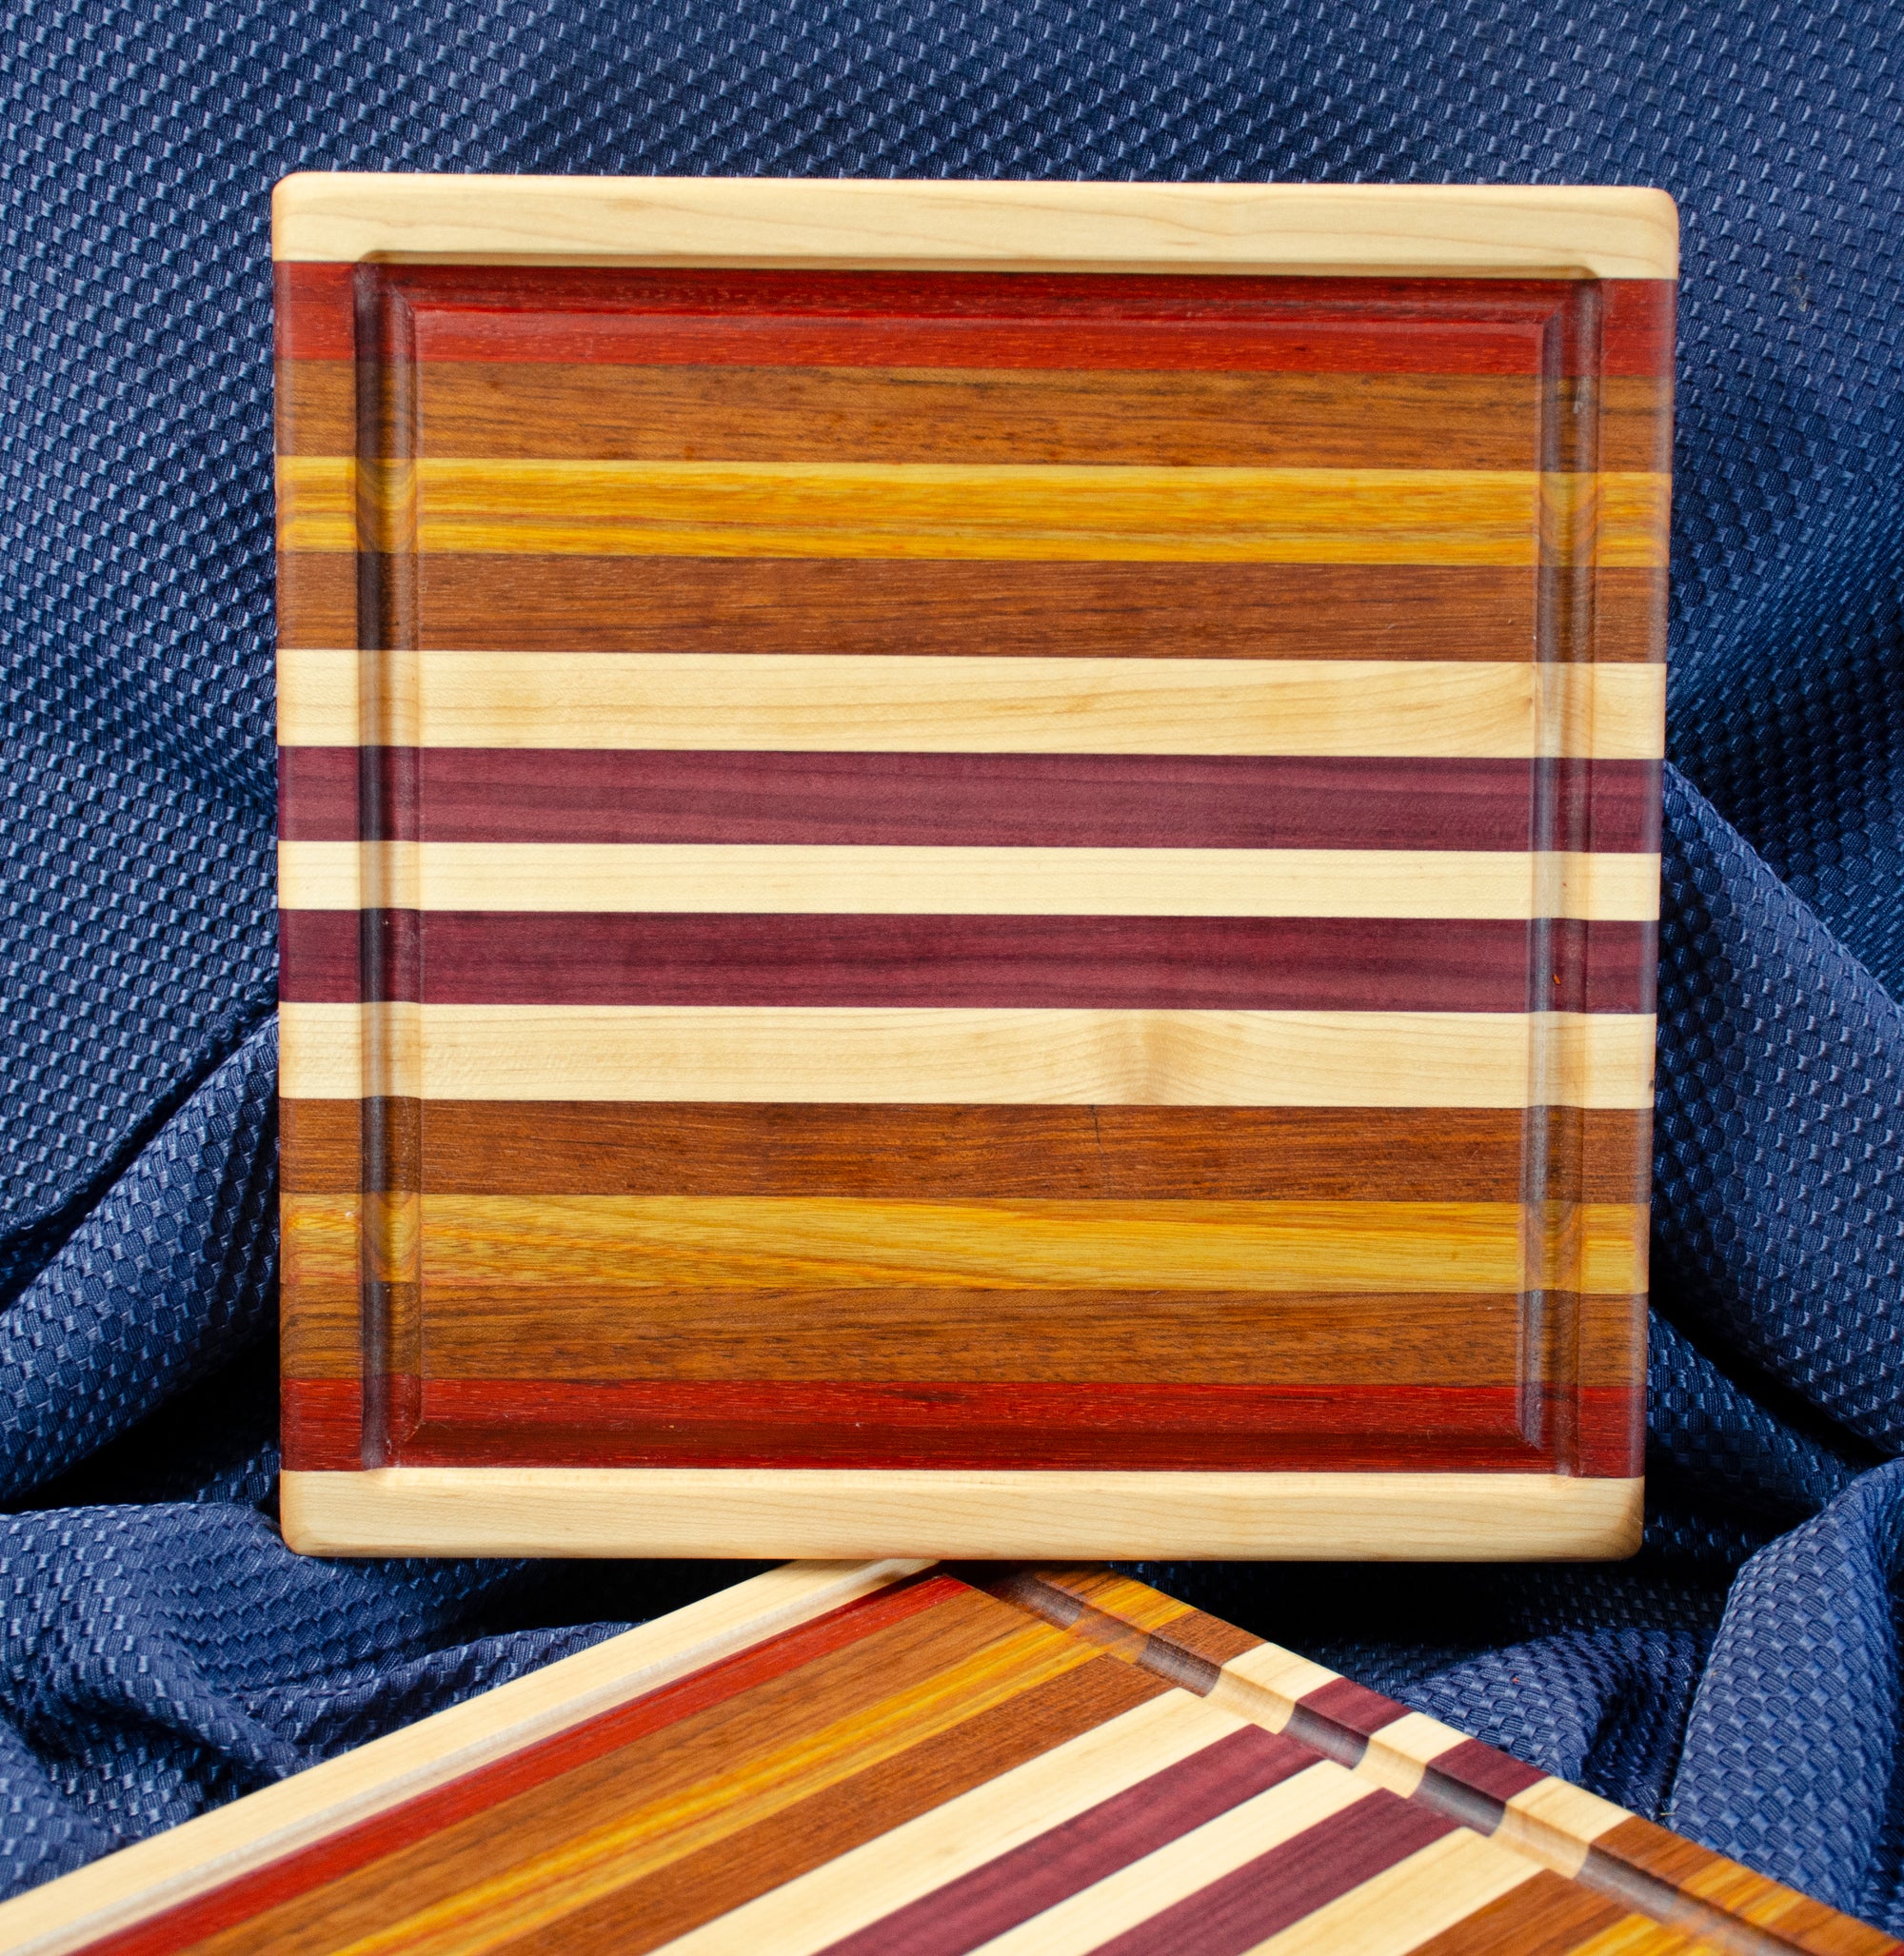 Wooden Cheese Boards ✓ Free shipping